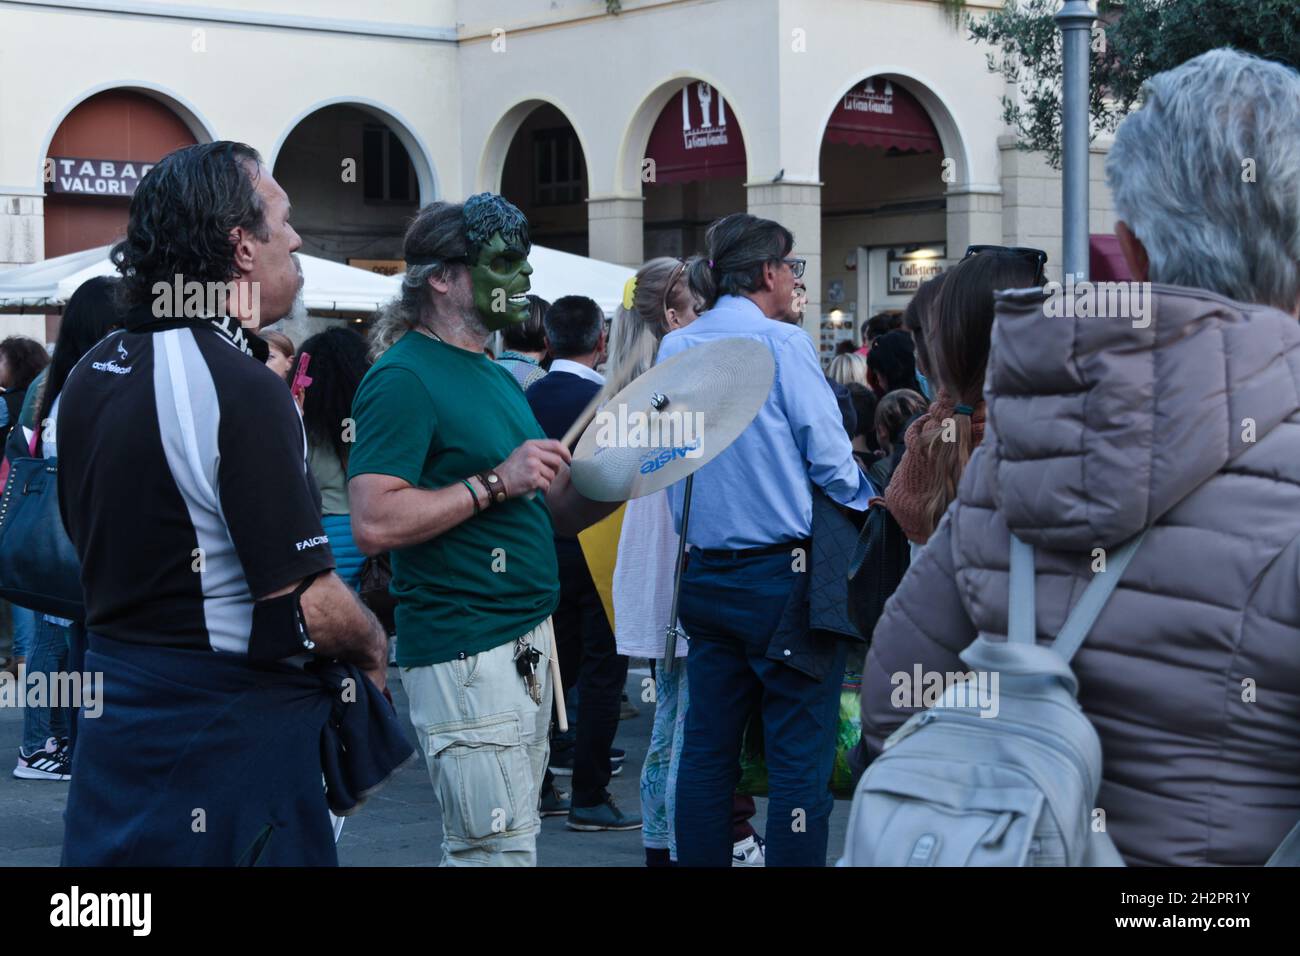 Italian Peaceful Demonstration against Green Pass in Livorno October 2021 Stock Photo